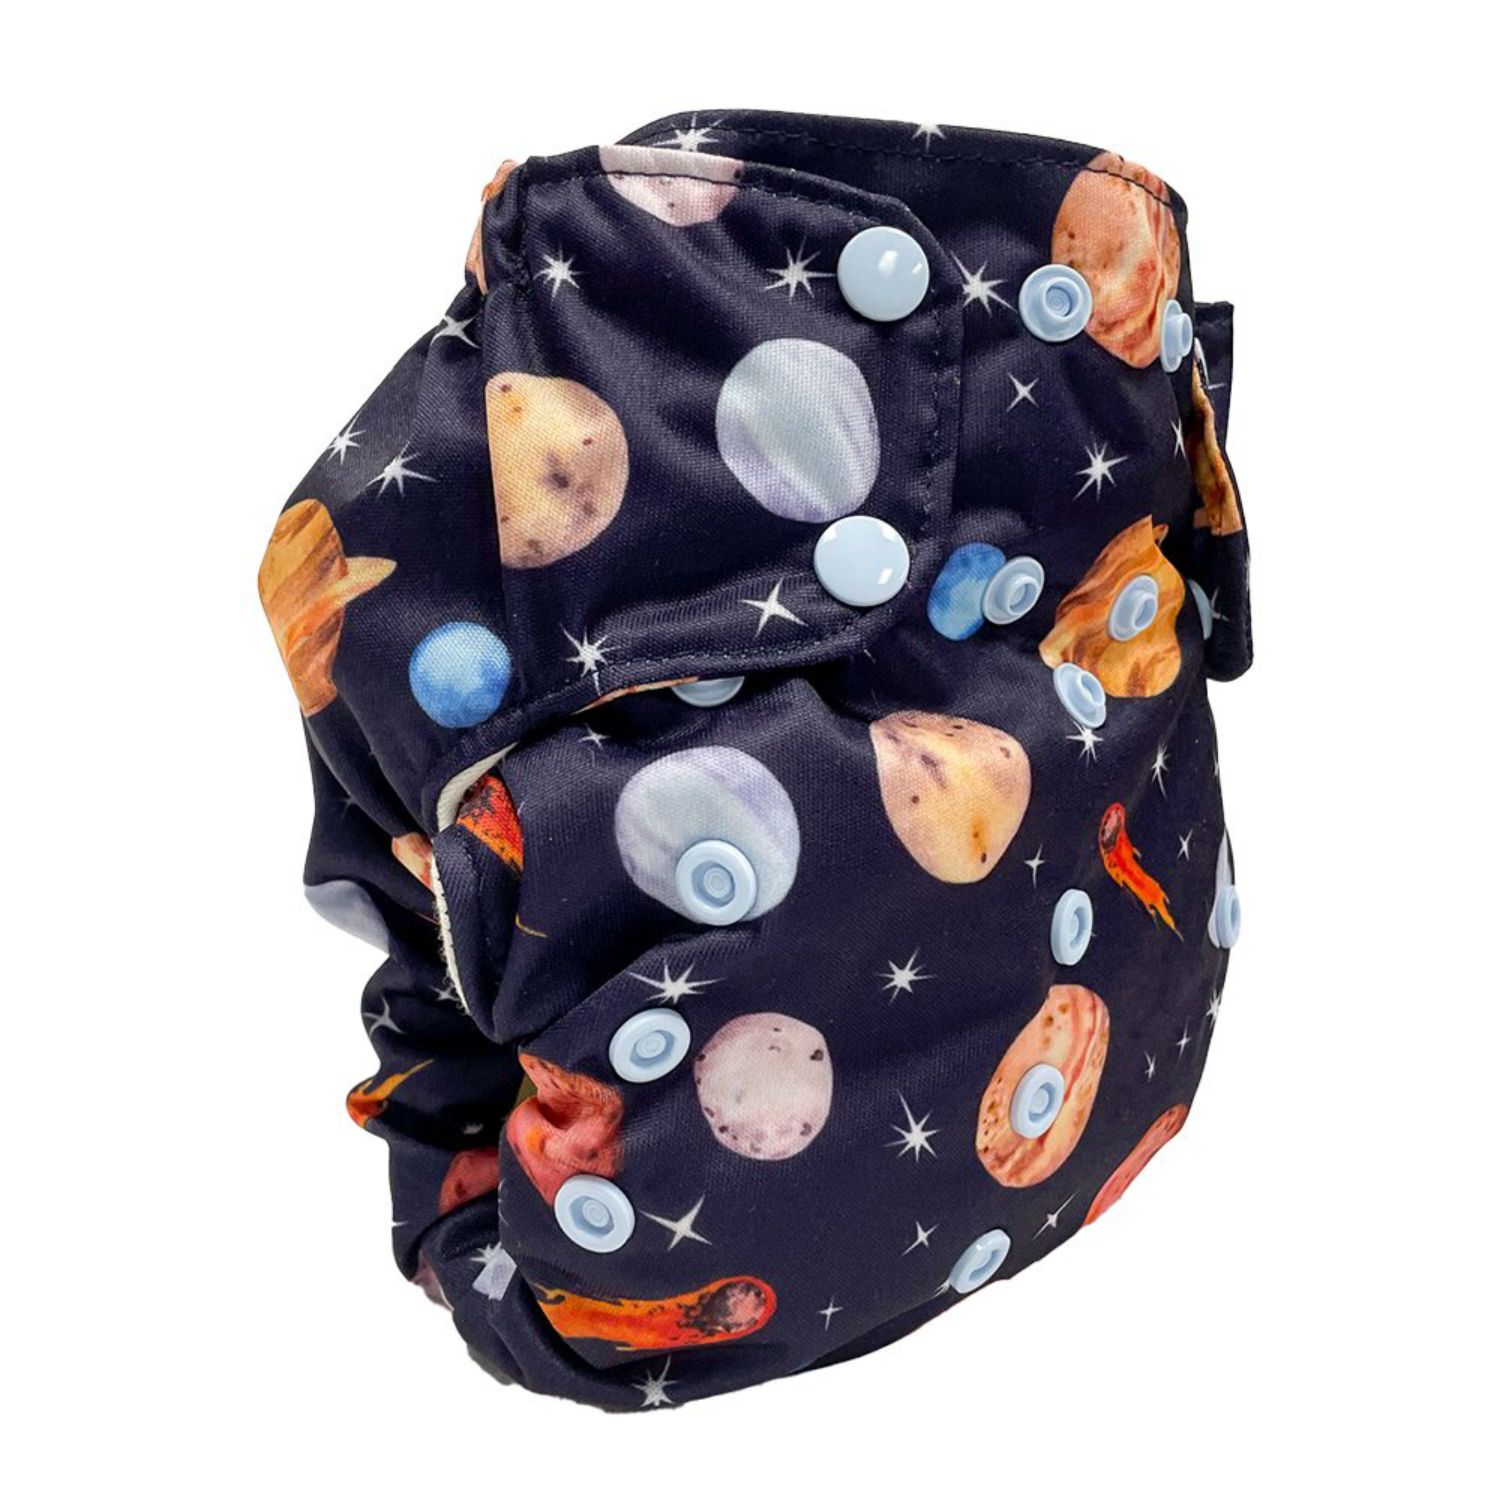 Smart Bottoms 3.1 One Size All-in-One nappy Pattern: Cosmos